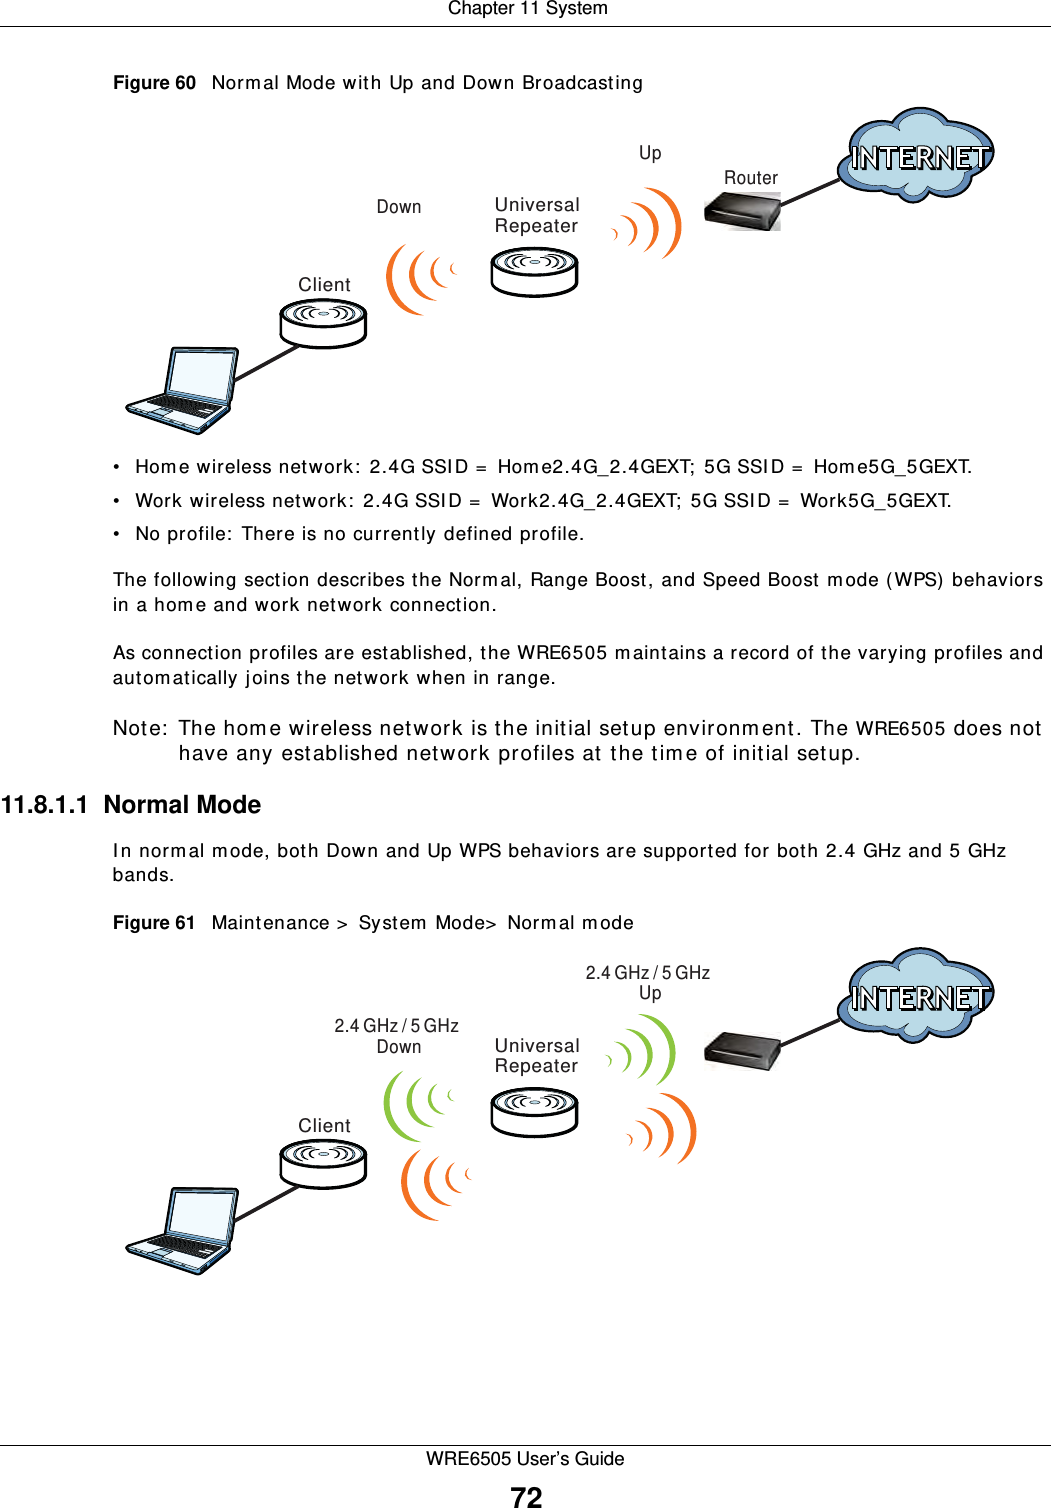  Chapter 11 SystemWRE6505 User’s Guide72Figure 60   Normal Mode with Up and Down Broadcasting • Home wireless network:  2.4G SSID =  Home2.4G_2.4GEXT;  5G SSI D =  Home5G_5GEXT.• Work wireless network:  2.4G SSID =  Work2.4G_2.4GEXT;  5G SSI D =  Work5G_5GEXT.• No profile:  There is no currently defined profile. The following section describes the Norm al, Range Boost, and Speed Boost m ode (WPS) behaviors in a hom e and work network connection.As connection profiles are established, the WRE6505 maintains a record of the varying profiles and autom atically joins the network when in range.Note:  The hom e wireless network is the initial setup environm ent. The WRE6505 does not have any established network profiles at the time of initial setup.11.8.1.1  Normal ModeIn norm al m ode, both Down and Up WPS behaviors are supported for both 2.4 GHz and 5 GHz bands.Figure 61   Maintenance &gt;  System  Mode&gt;  Norm al m ode UniversalRepeaterClientUpRouterDownUniversalRepeaterClient2.4 GHz / 5 GHz Up2.4 GHz / 5 GHz Down